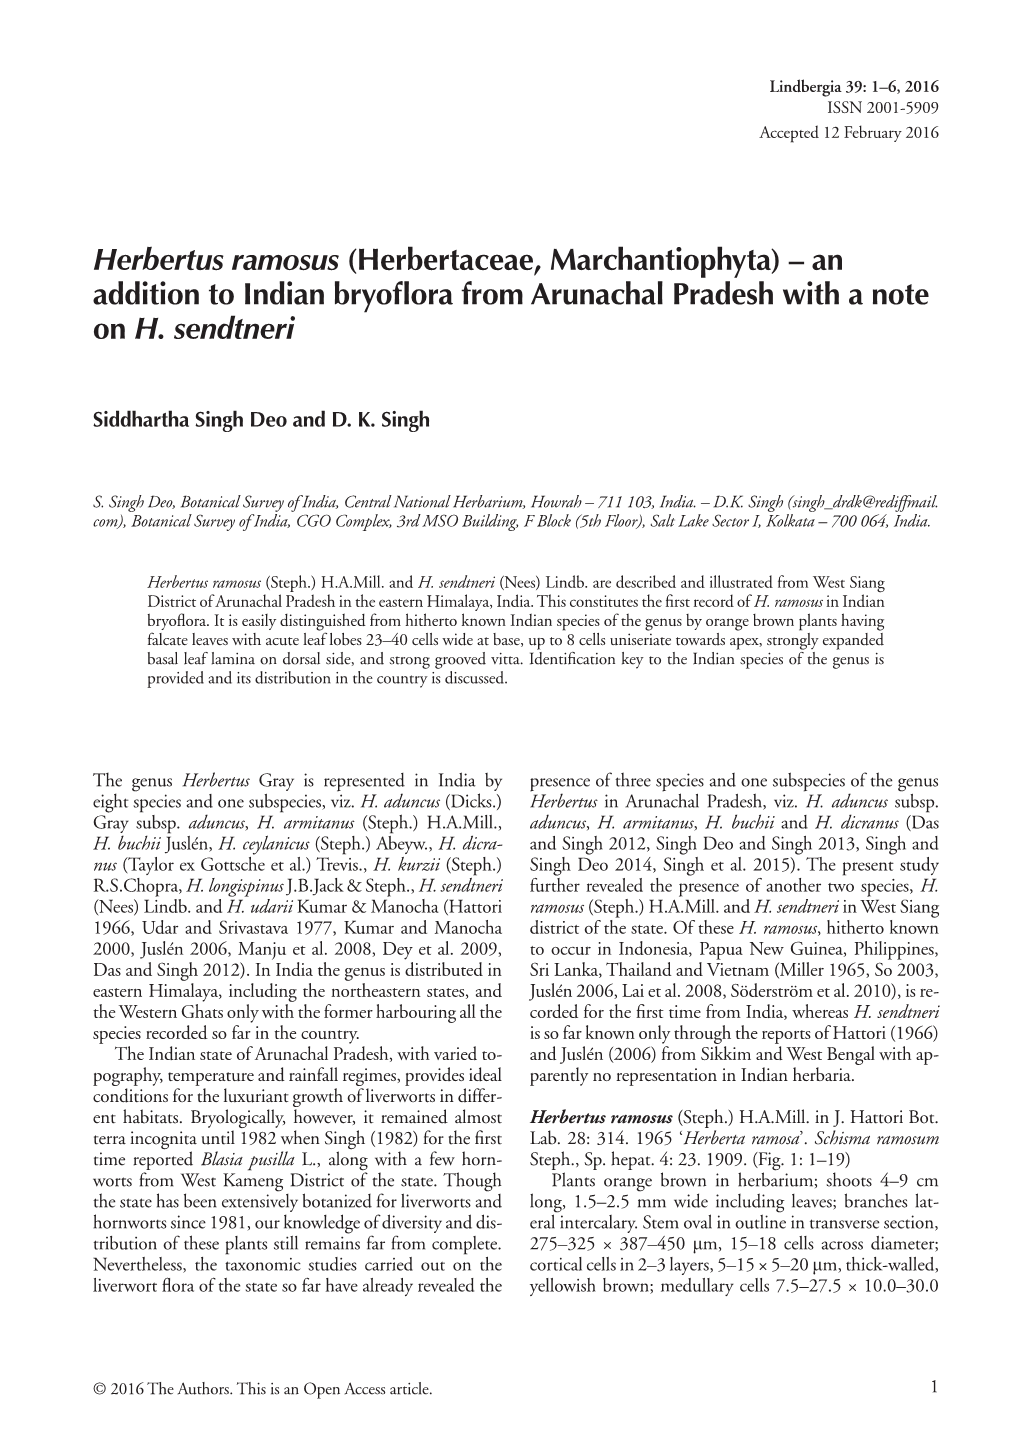 Herbertus Ramosus (Herbertaceae, Marchantiophyta) – an Addition to Indian Bryoflora from Arunachal Pradesh with a Note on H